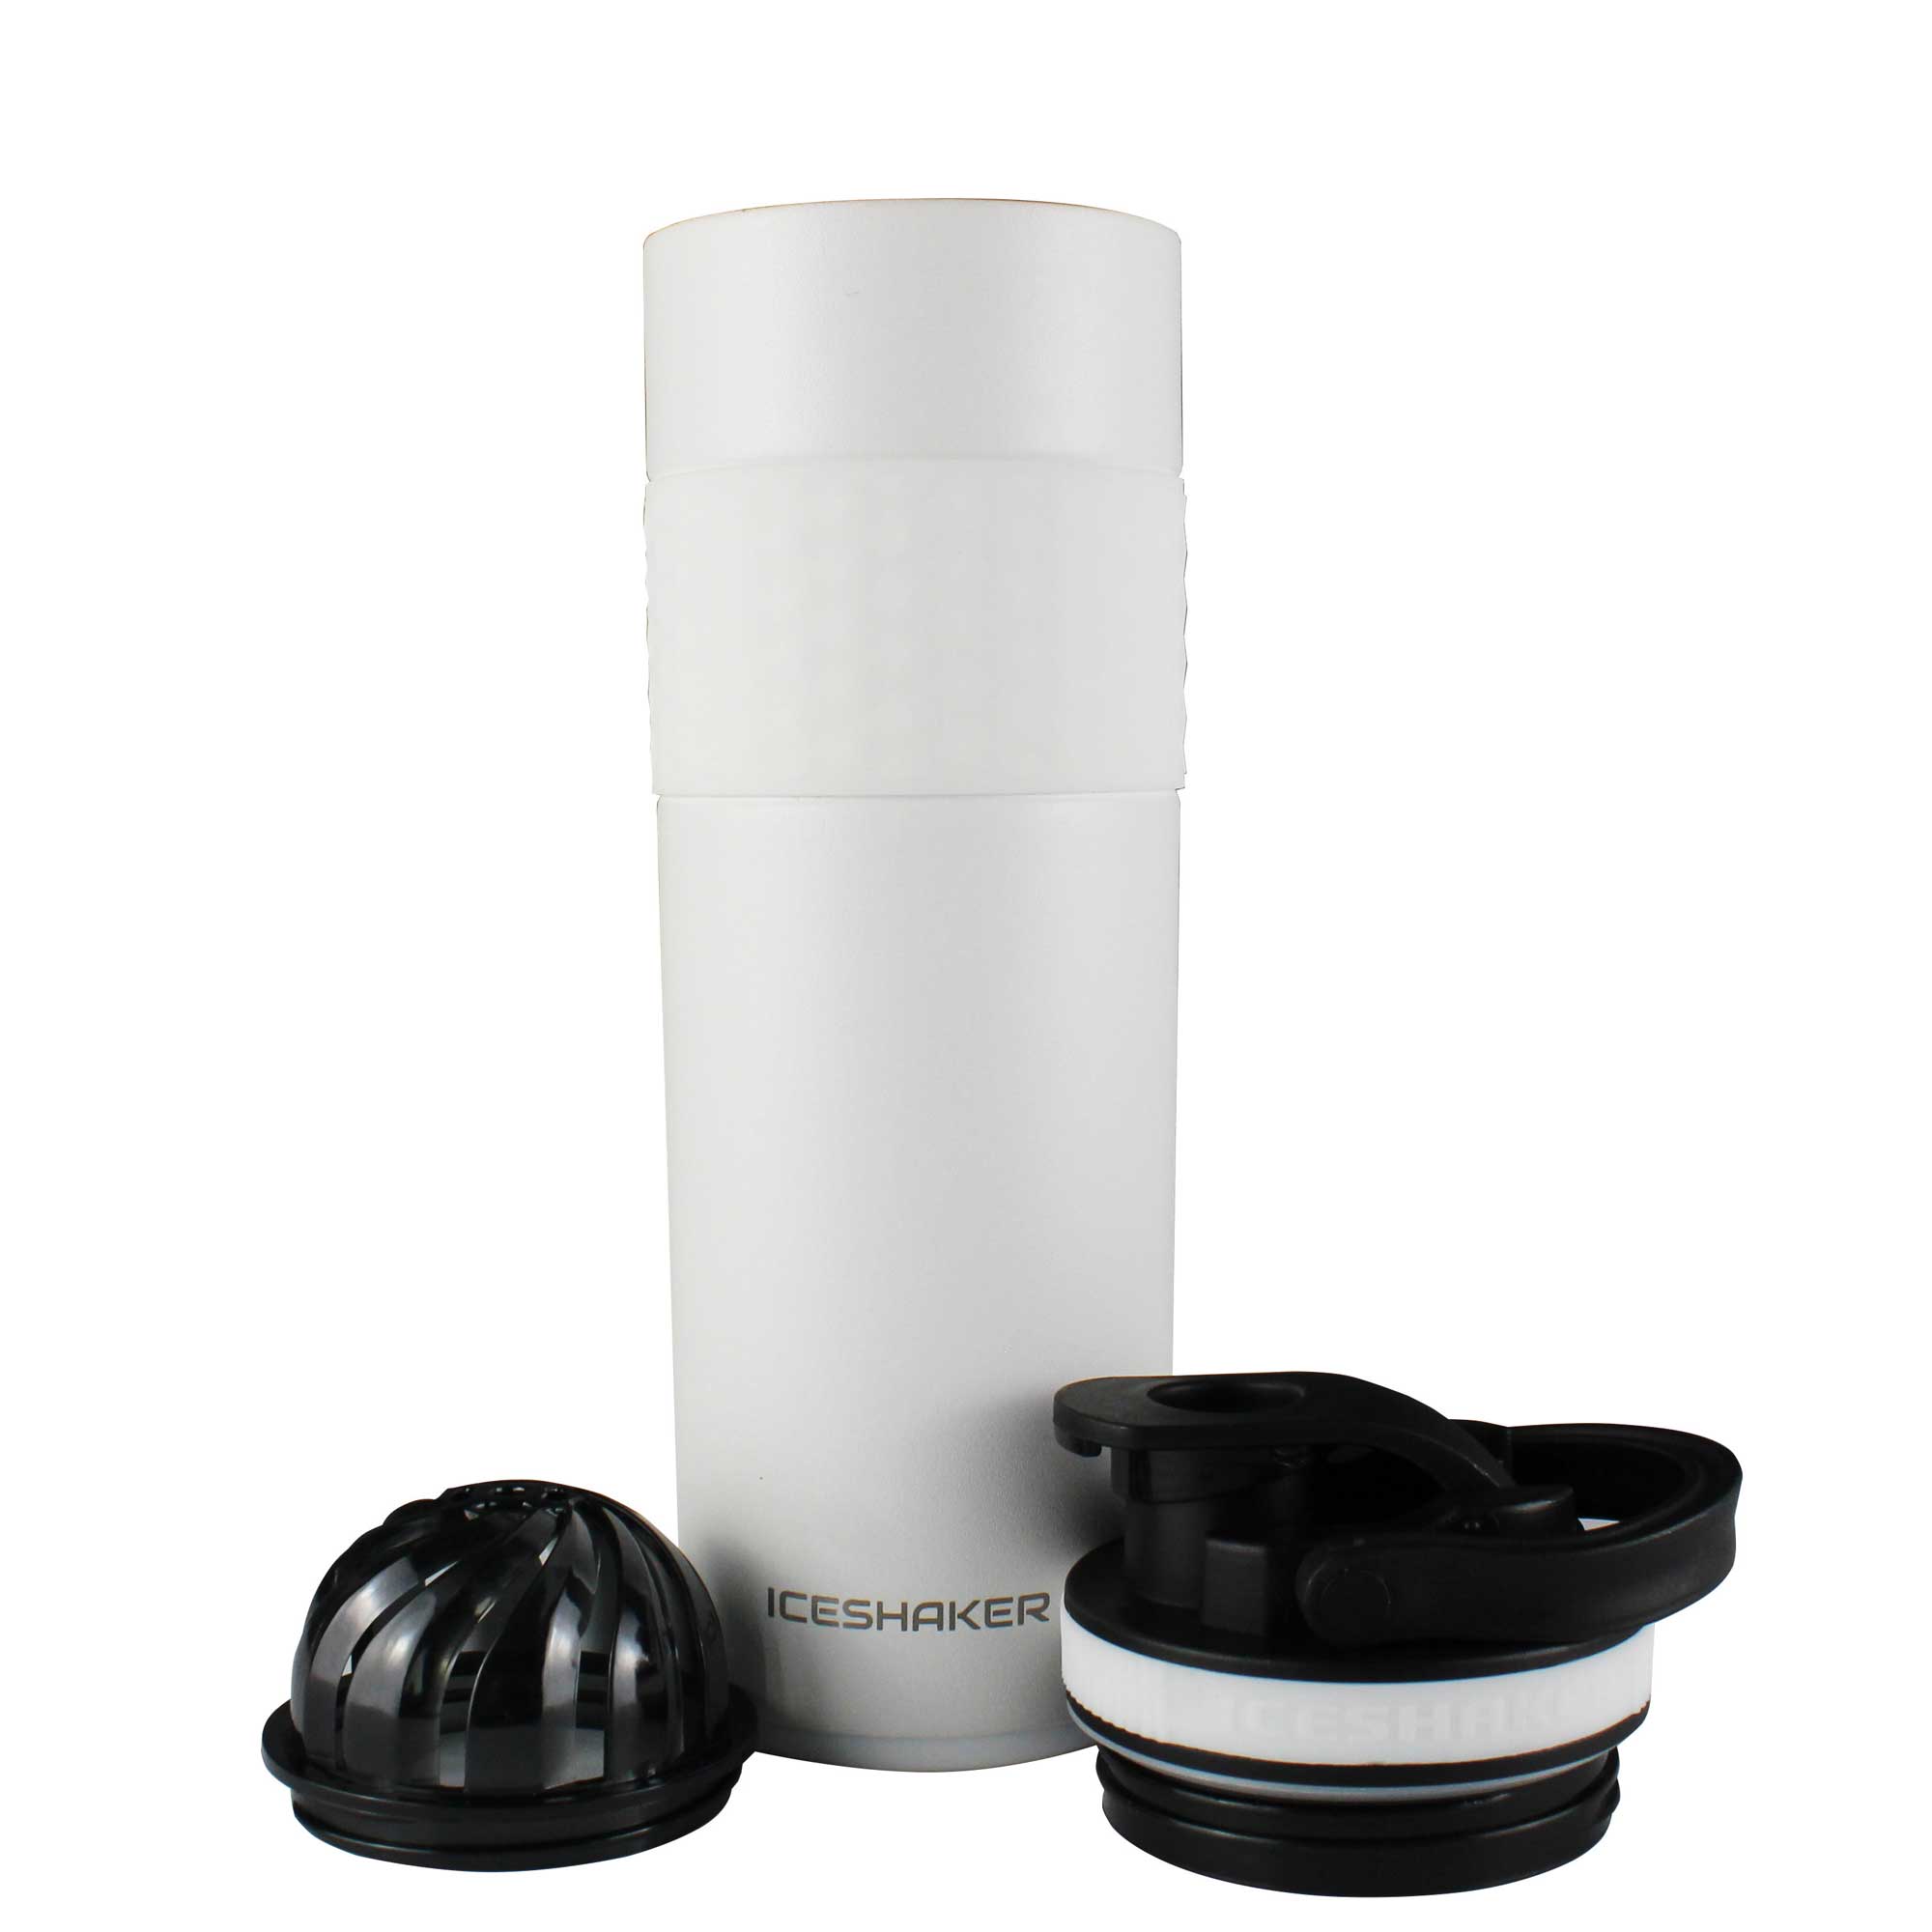 [2 Pack] 20-oz Shaker Bottle with Attachable Storage Compartments (White &  Black - 2 Pack) | 20 Ounc…See more [2 Pack] 20-oz Shaker Bottle with